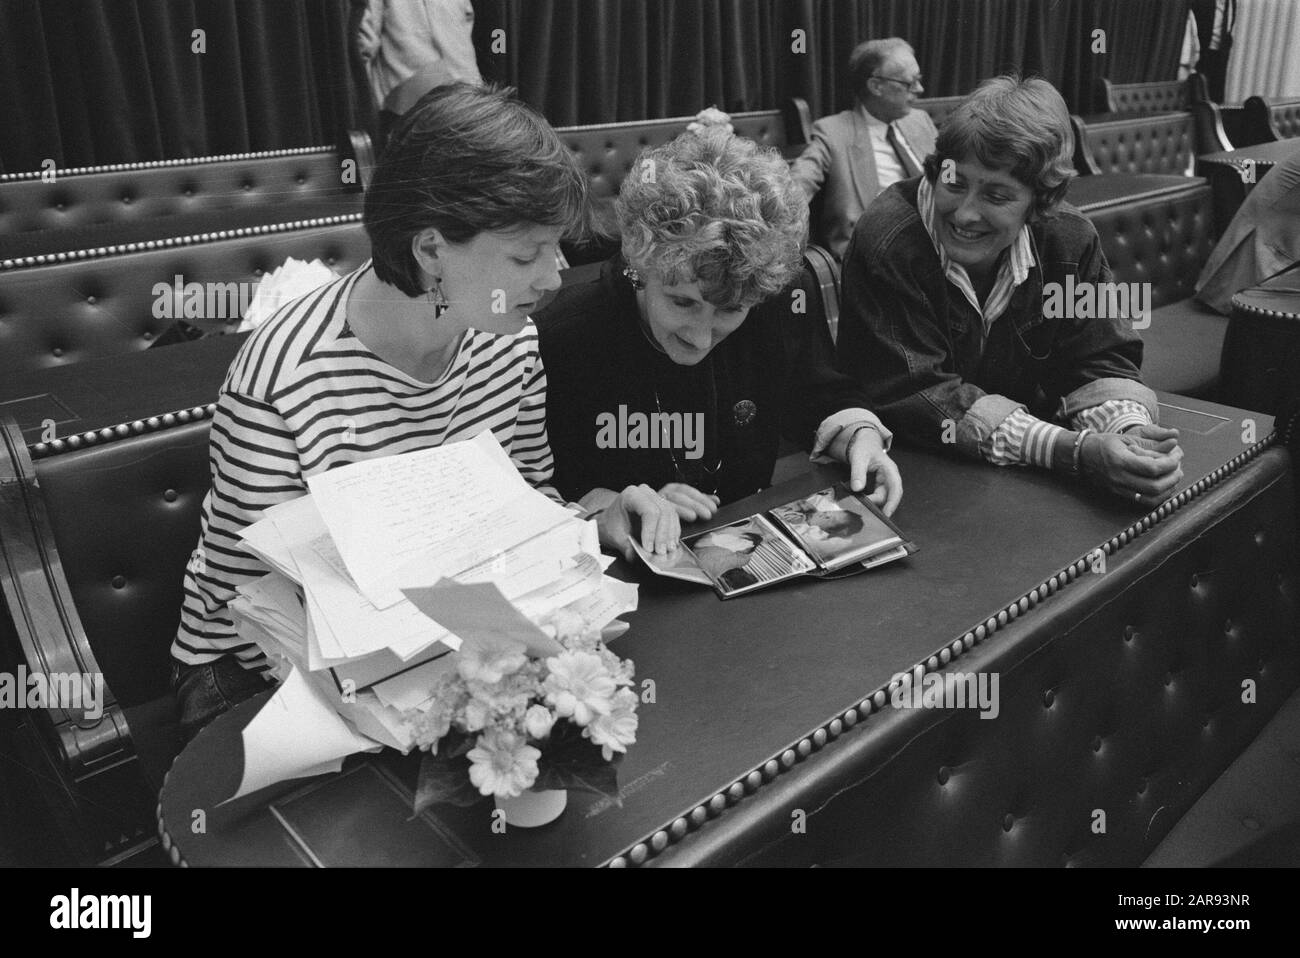 Second Chamber, from l.n.r. Andrée van Es, Wijnie Jabaaij and Ria Beckers view photos of the baby of Van Es Datate: 30 August 1988 Location: The Hague, South-Holland Keywords: members of the room, politicians, women Personal name: Beckers, Ria, Es, Andrée van, Jabaaij, Wijnie Stock Photo